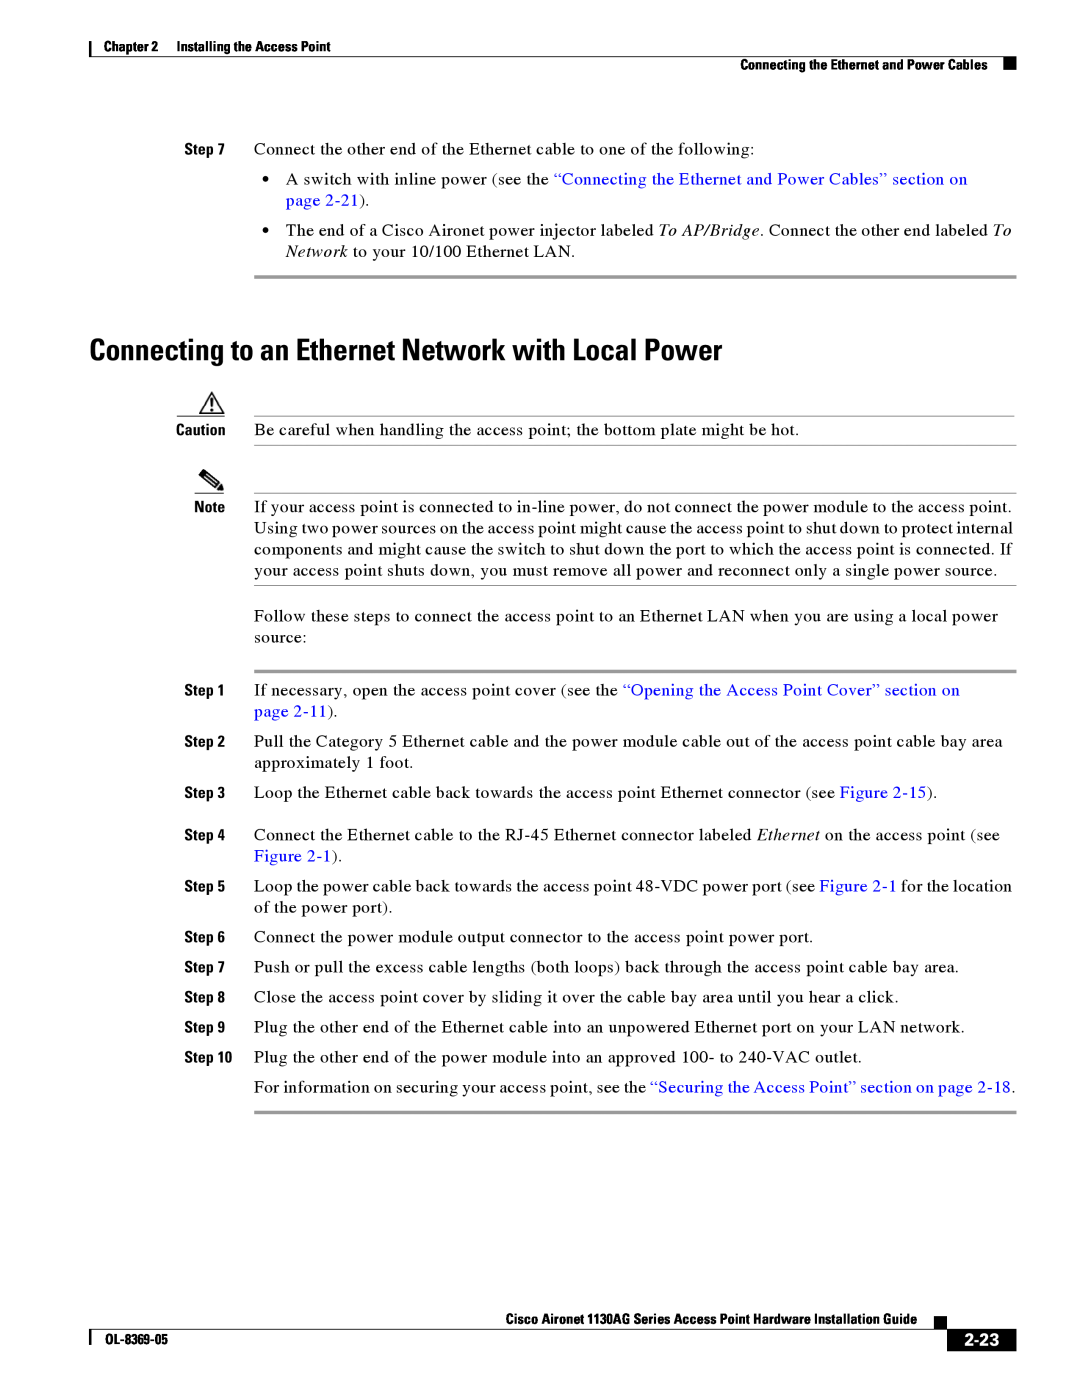 Cisco Systems 1130AG manual Connecting to an Ethernet Network with Local Power, 2-23 